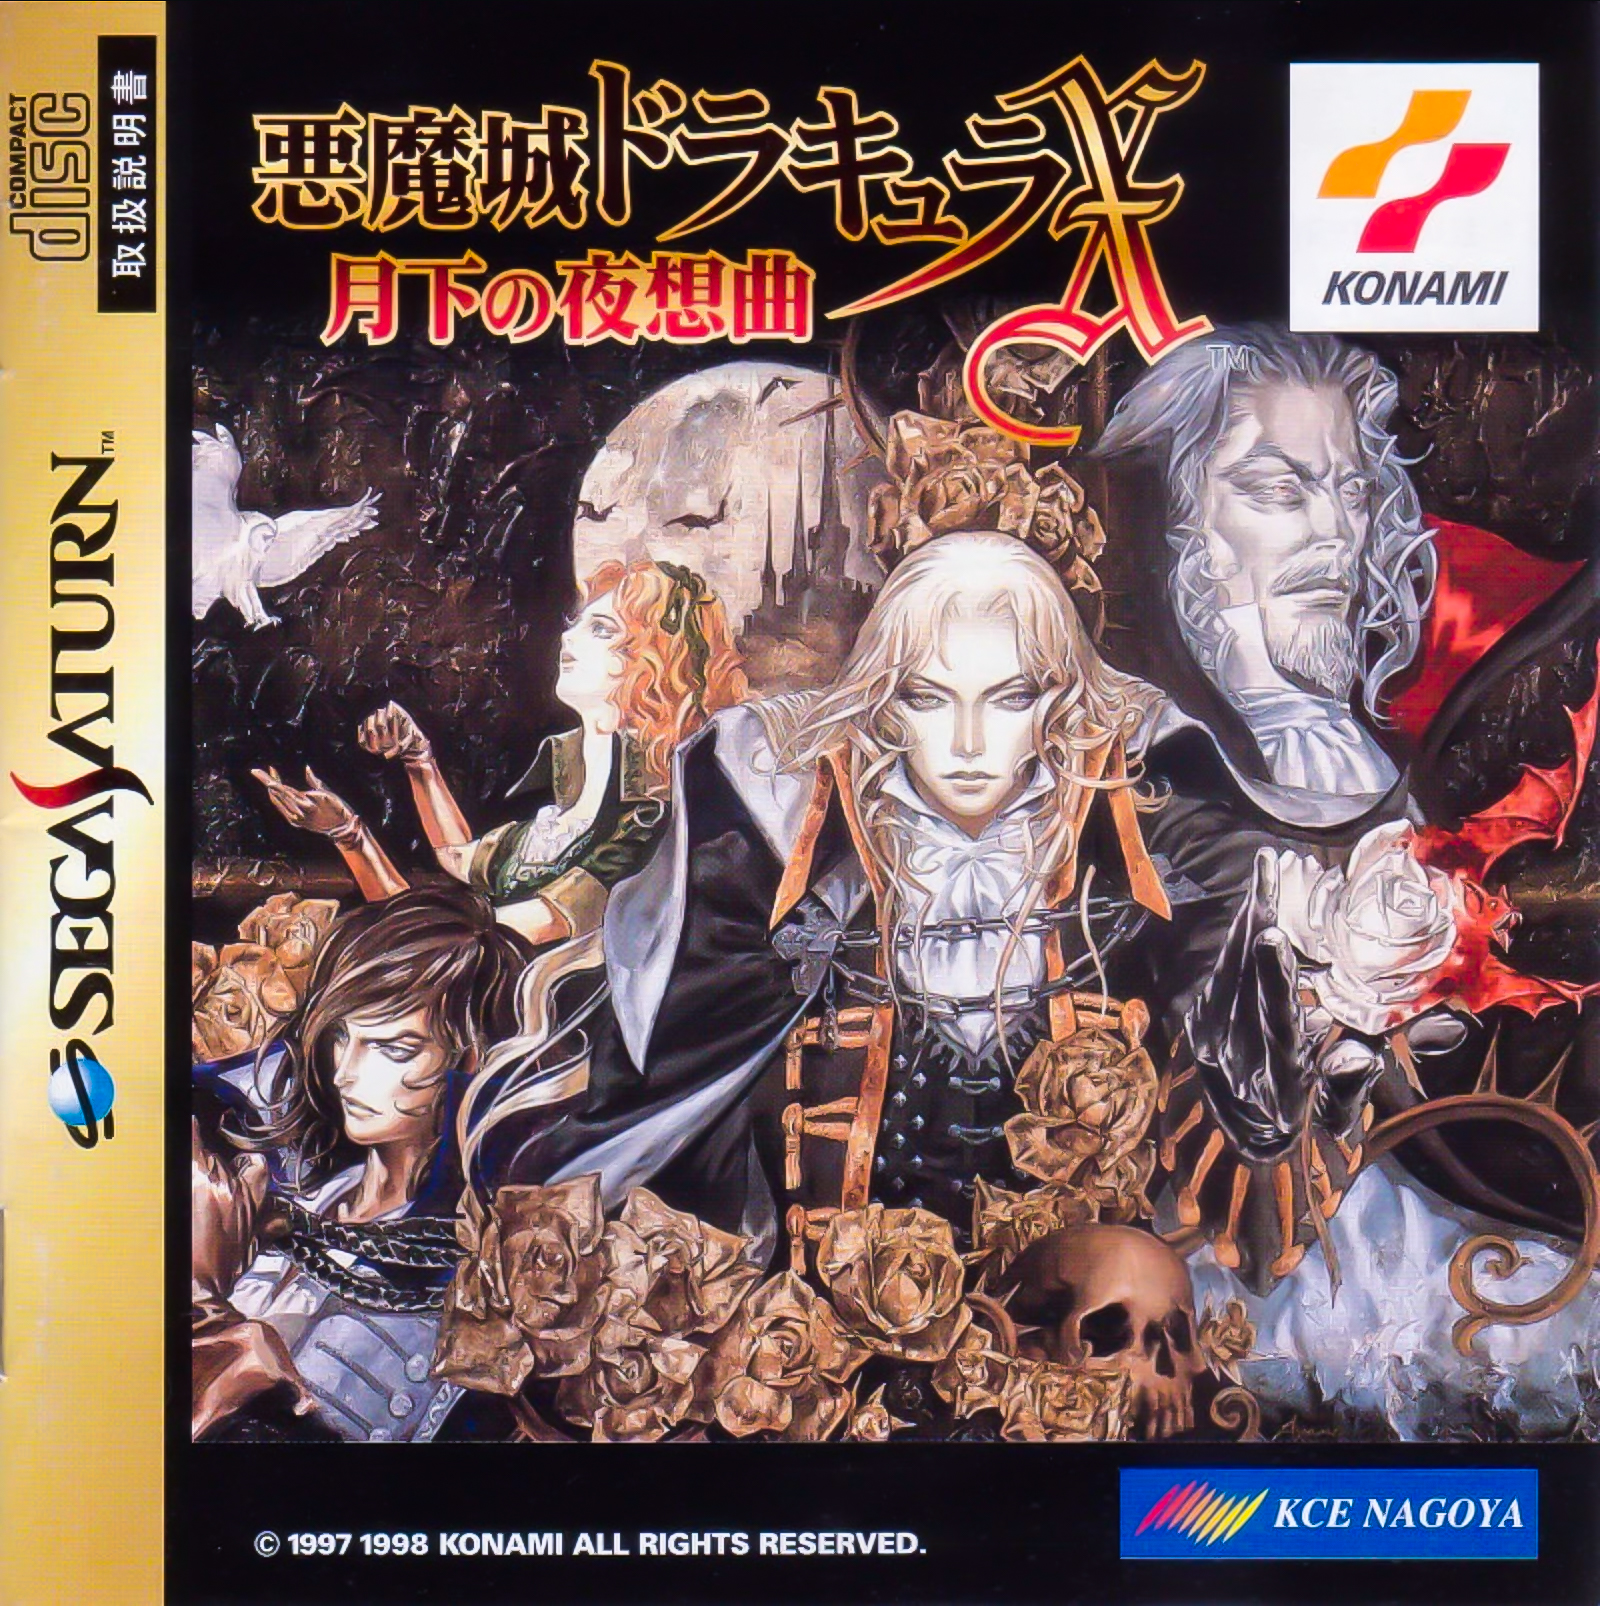 New Saturn Castlevania SOTN Improvement Hack Utilizes The 4MB RAM Cart For Fast Loading, Smoother Animations, And More.